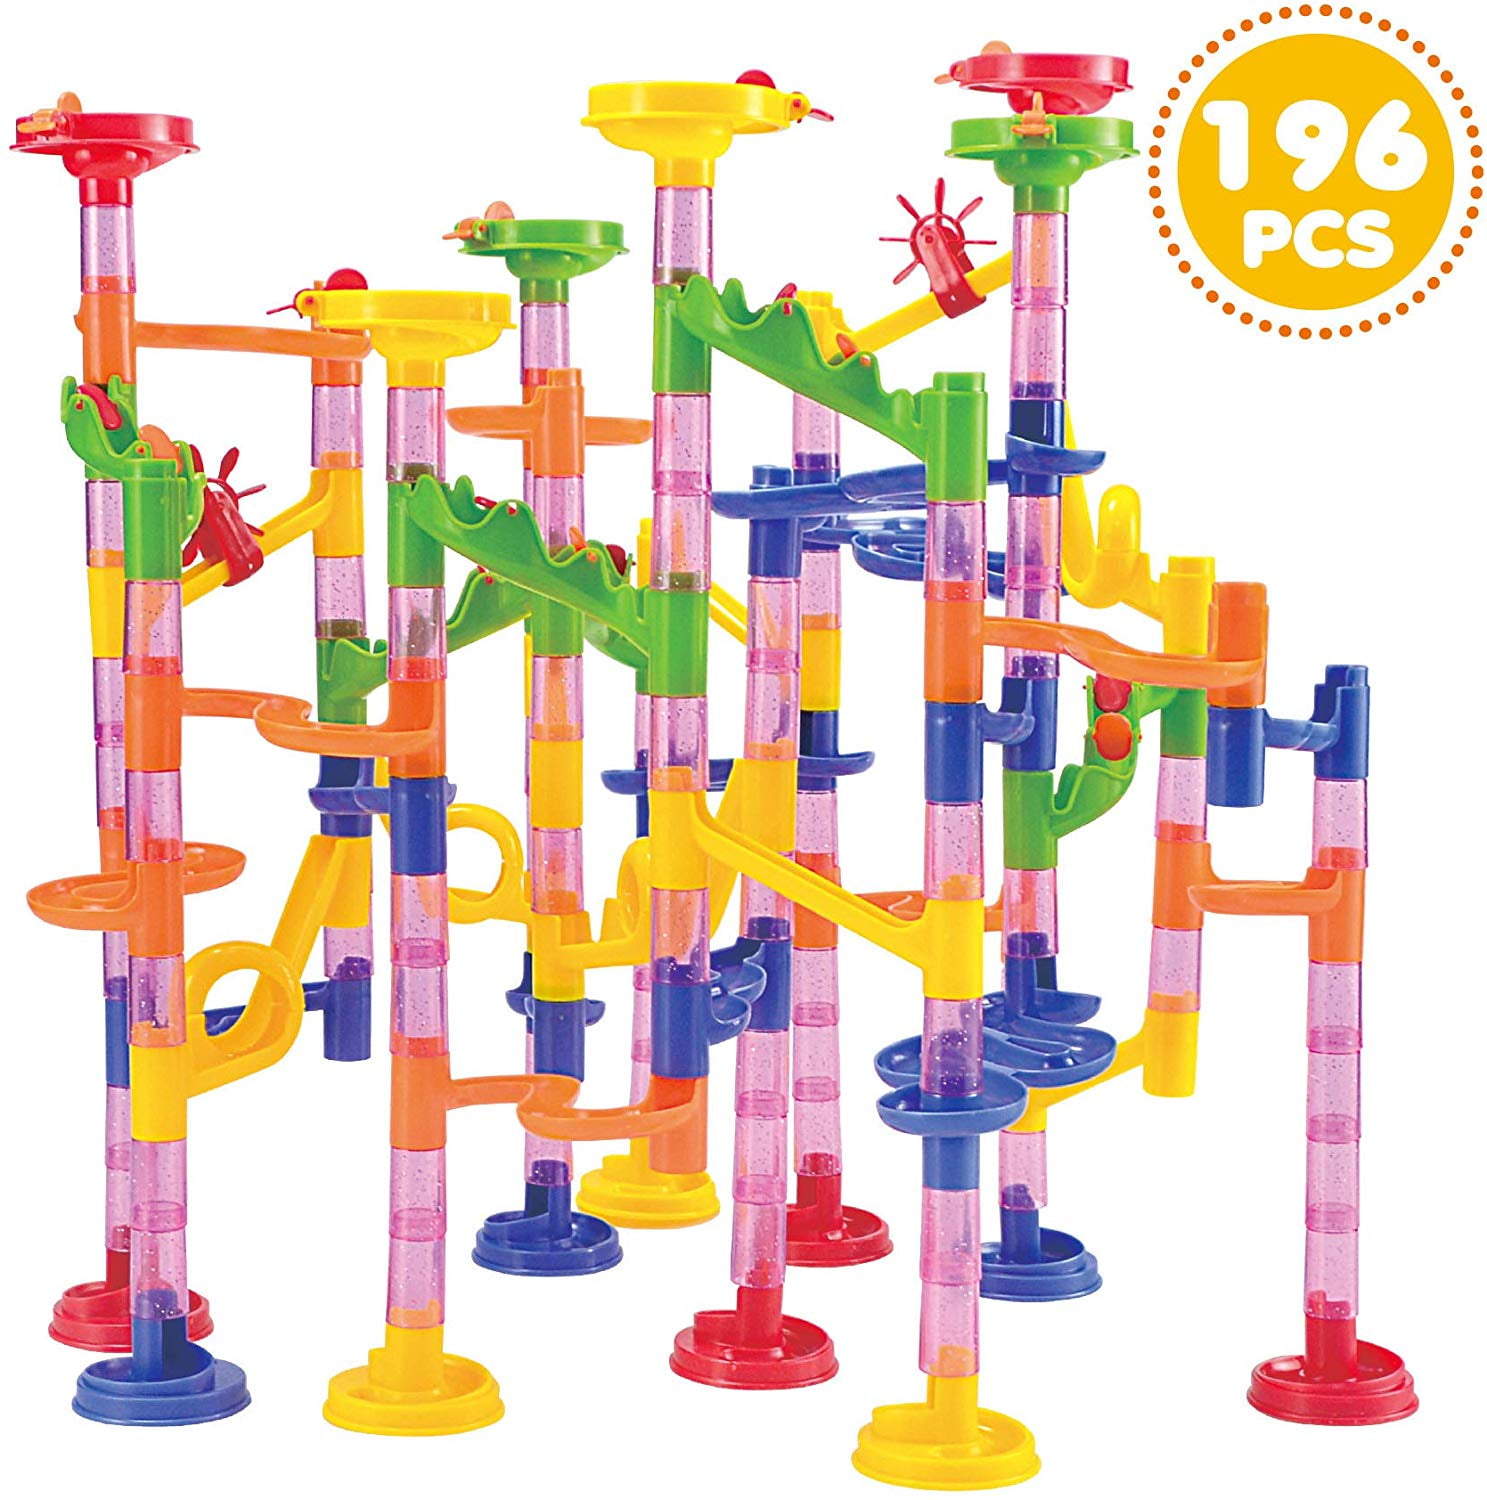 Marble Race 196 Pcs Marble Run Compact Set, Construction Building Blocks Toys, STEM Learning Toy, Educational Building Block Toy